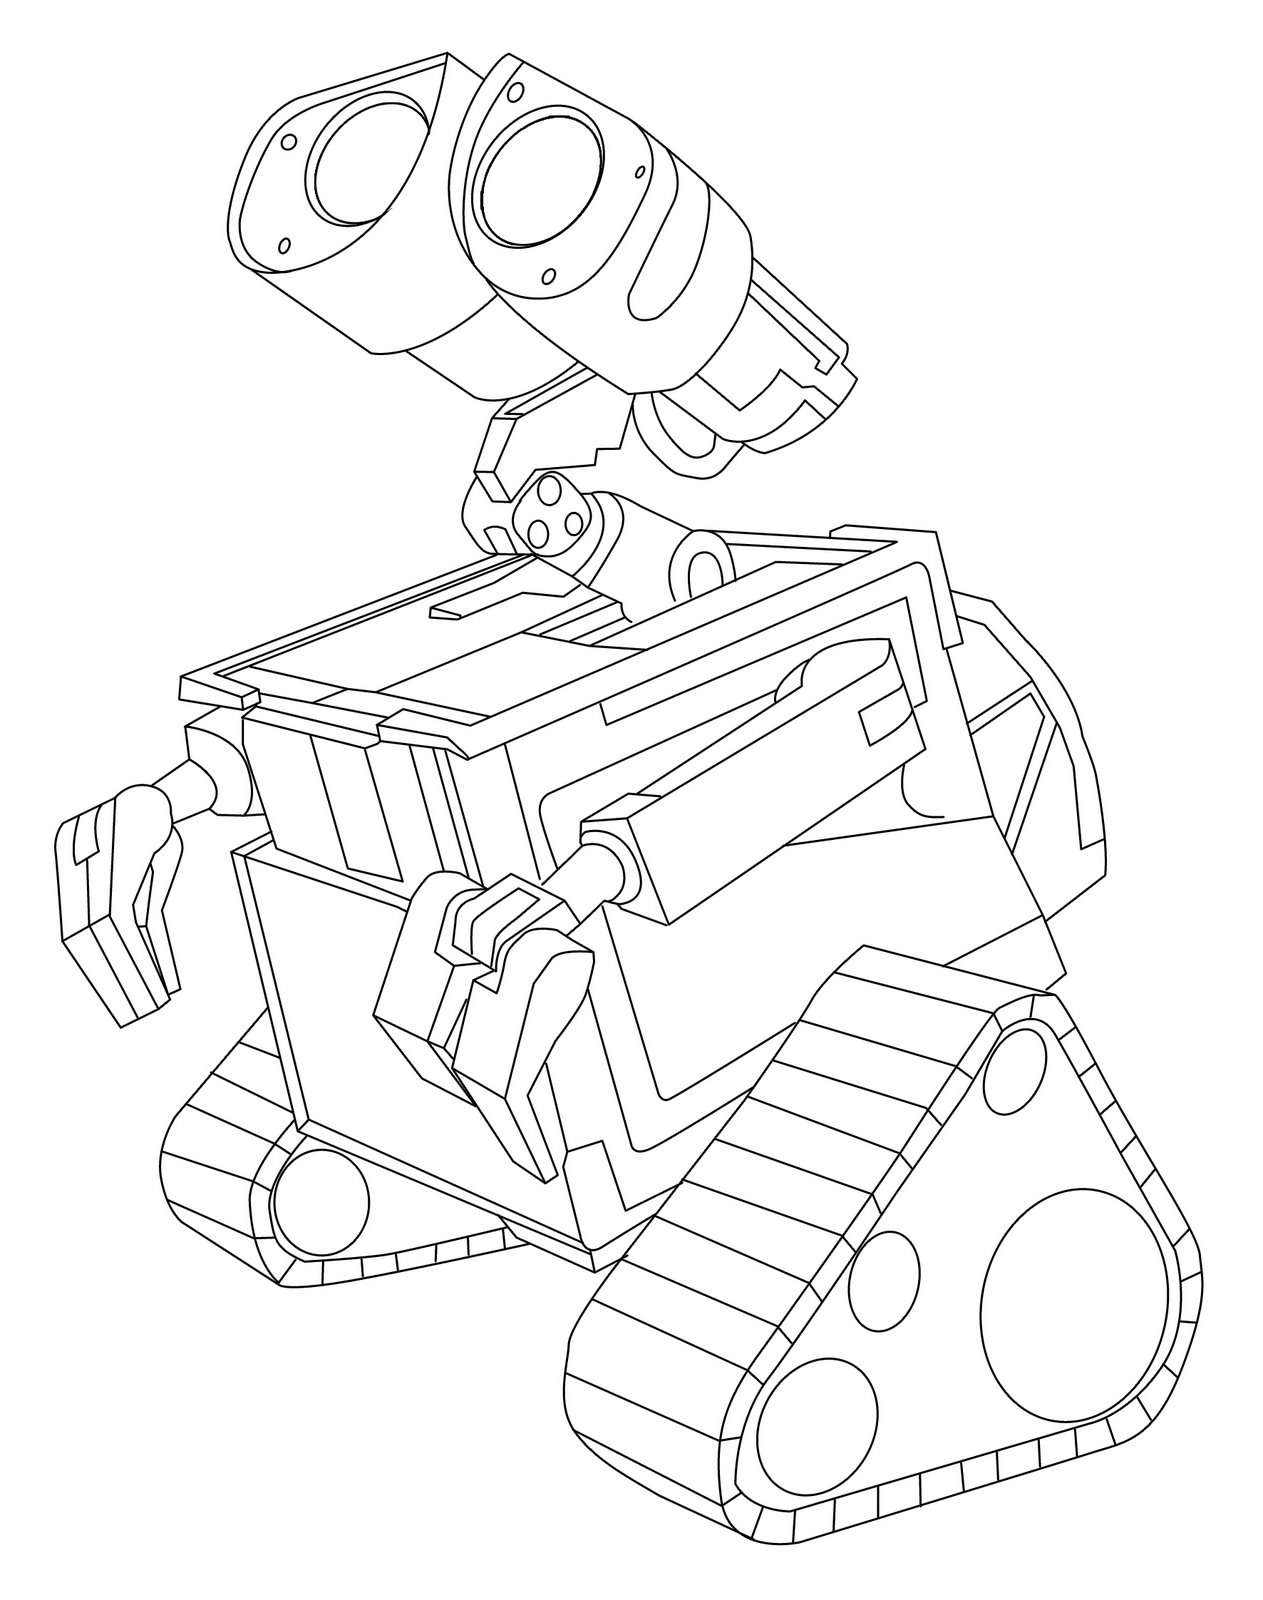 Drawing Wall-E #131992 (Animation Movies) – Printable coloring pages